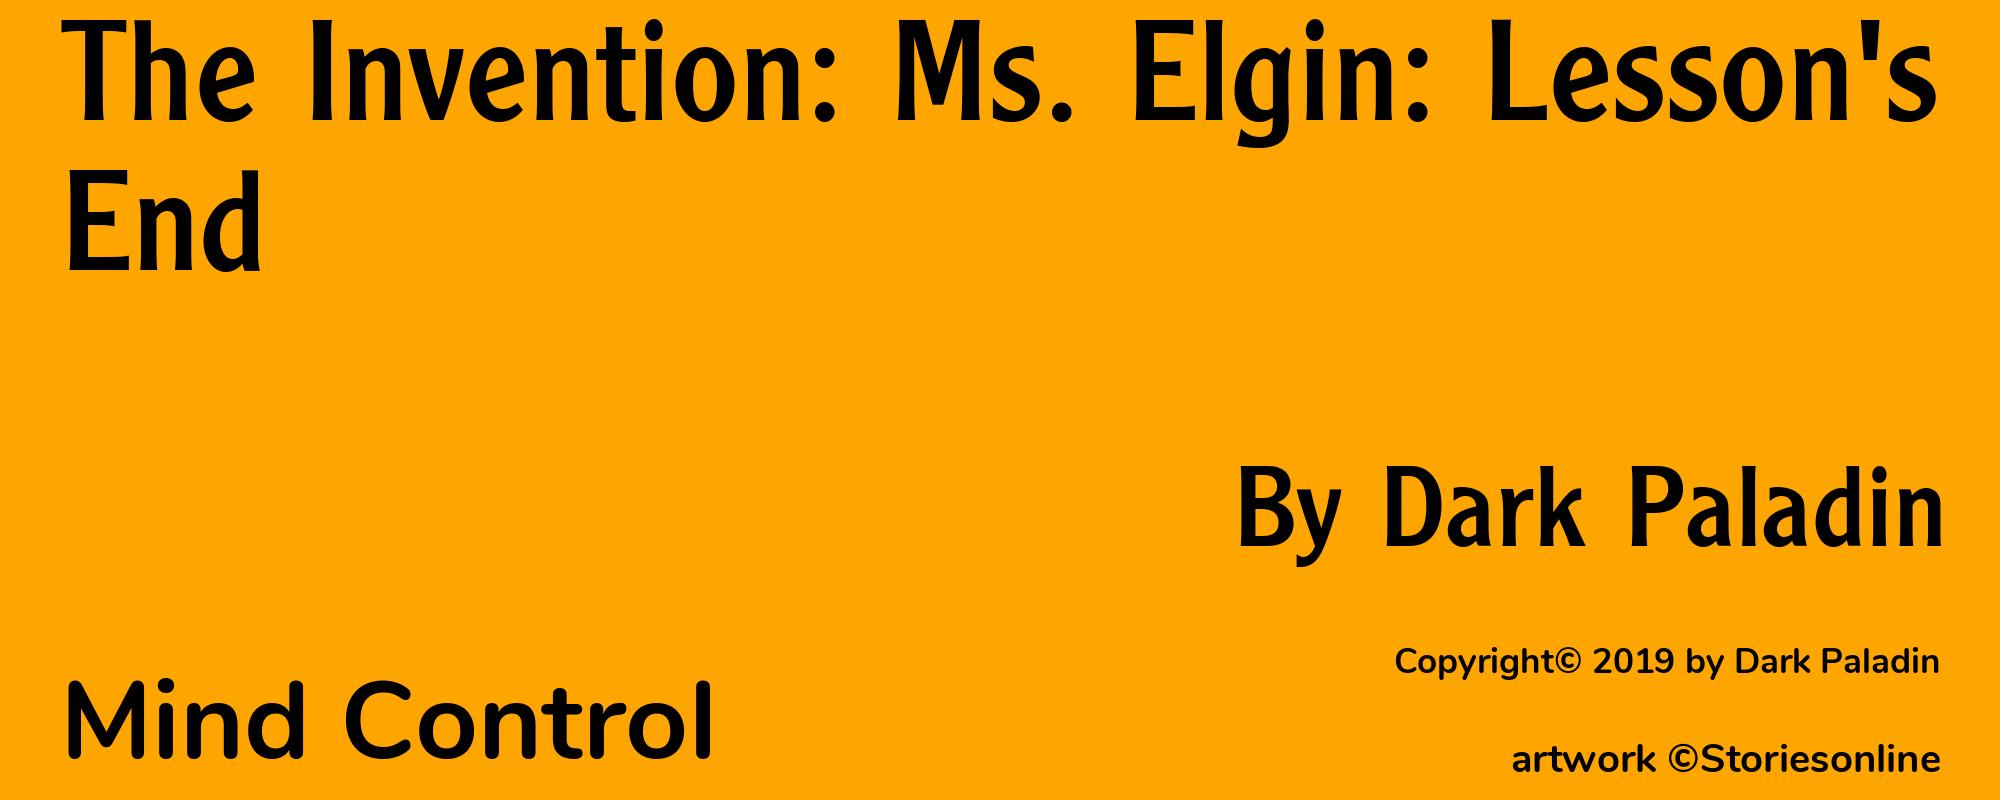 The Invention: Ms. Elgin: Lesson's End - Cover